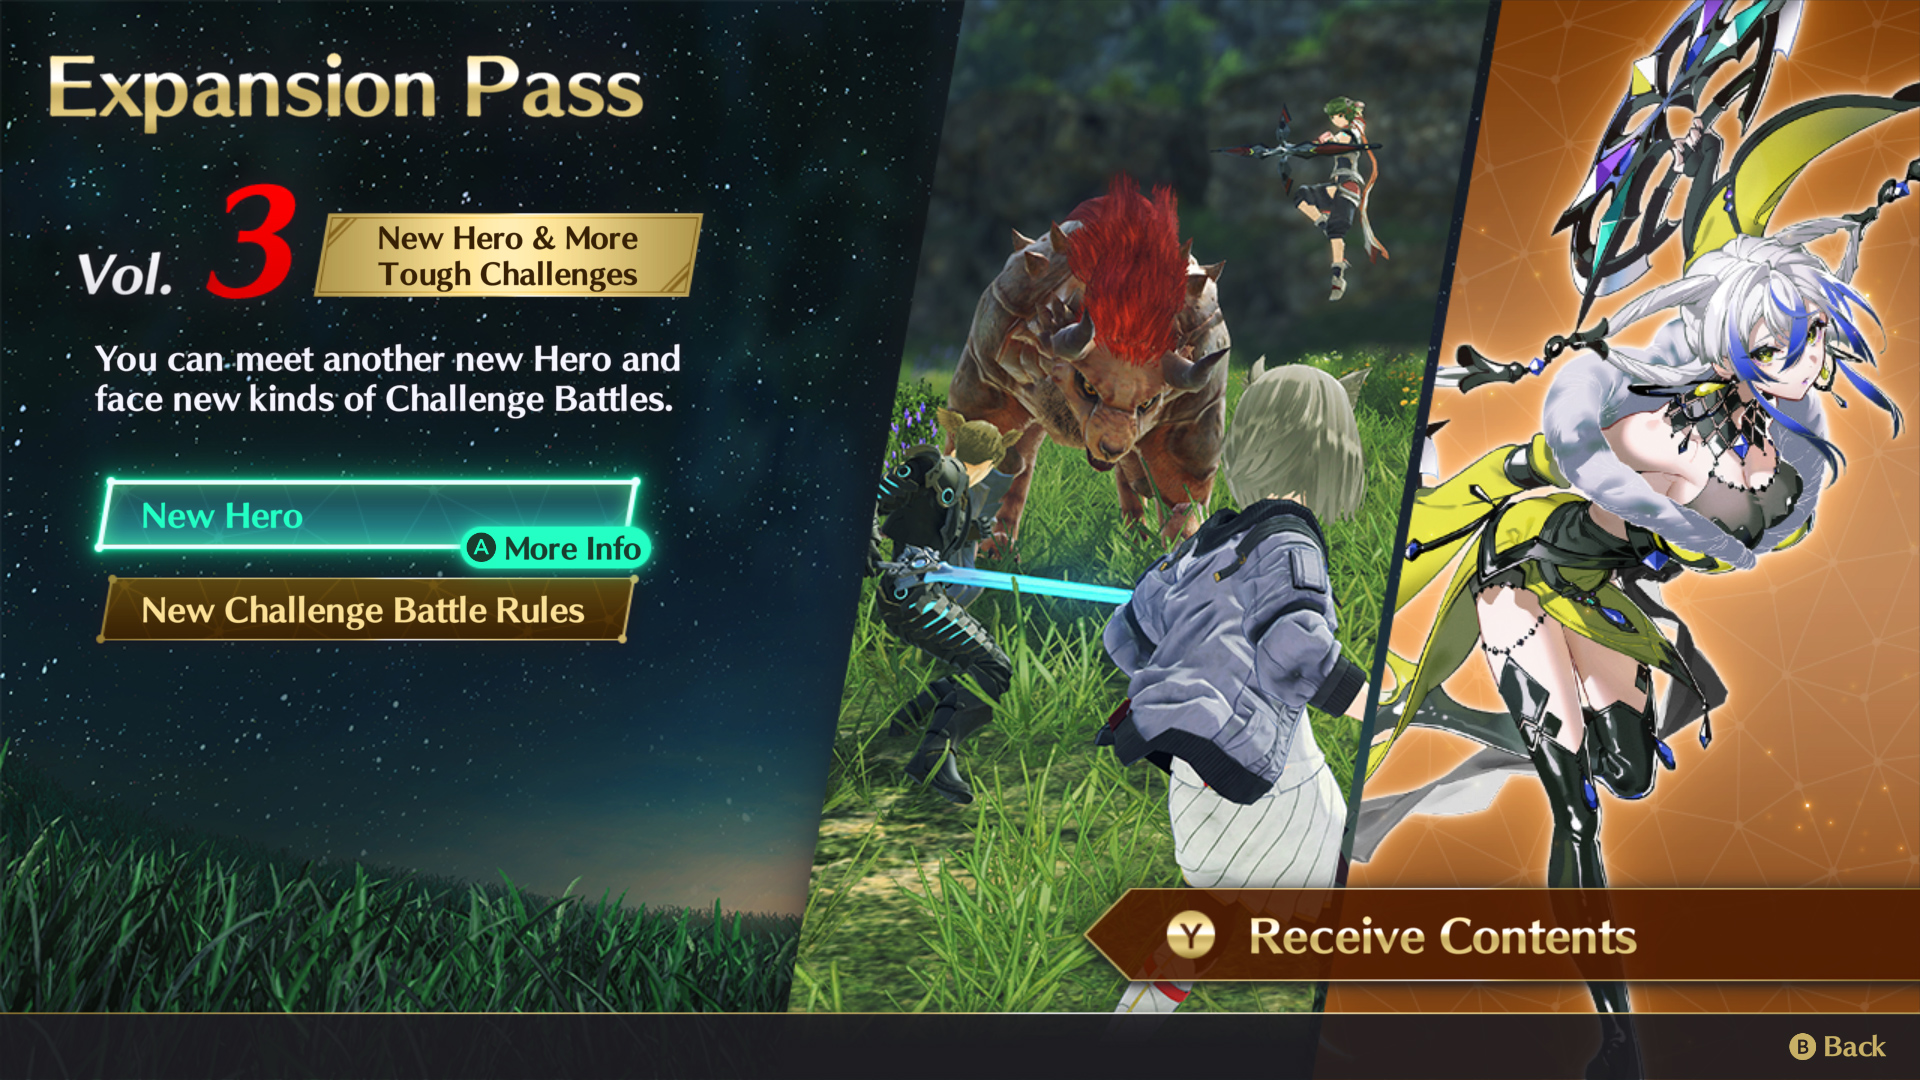 Xenoblade Chronicles 3 Expansion Pass